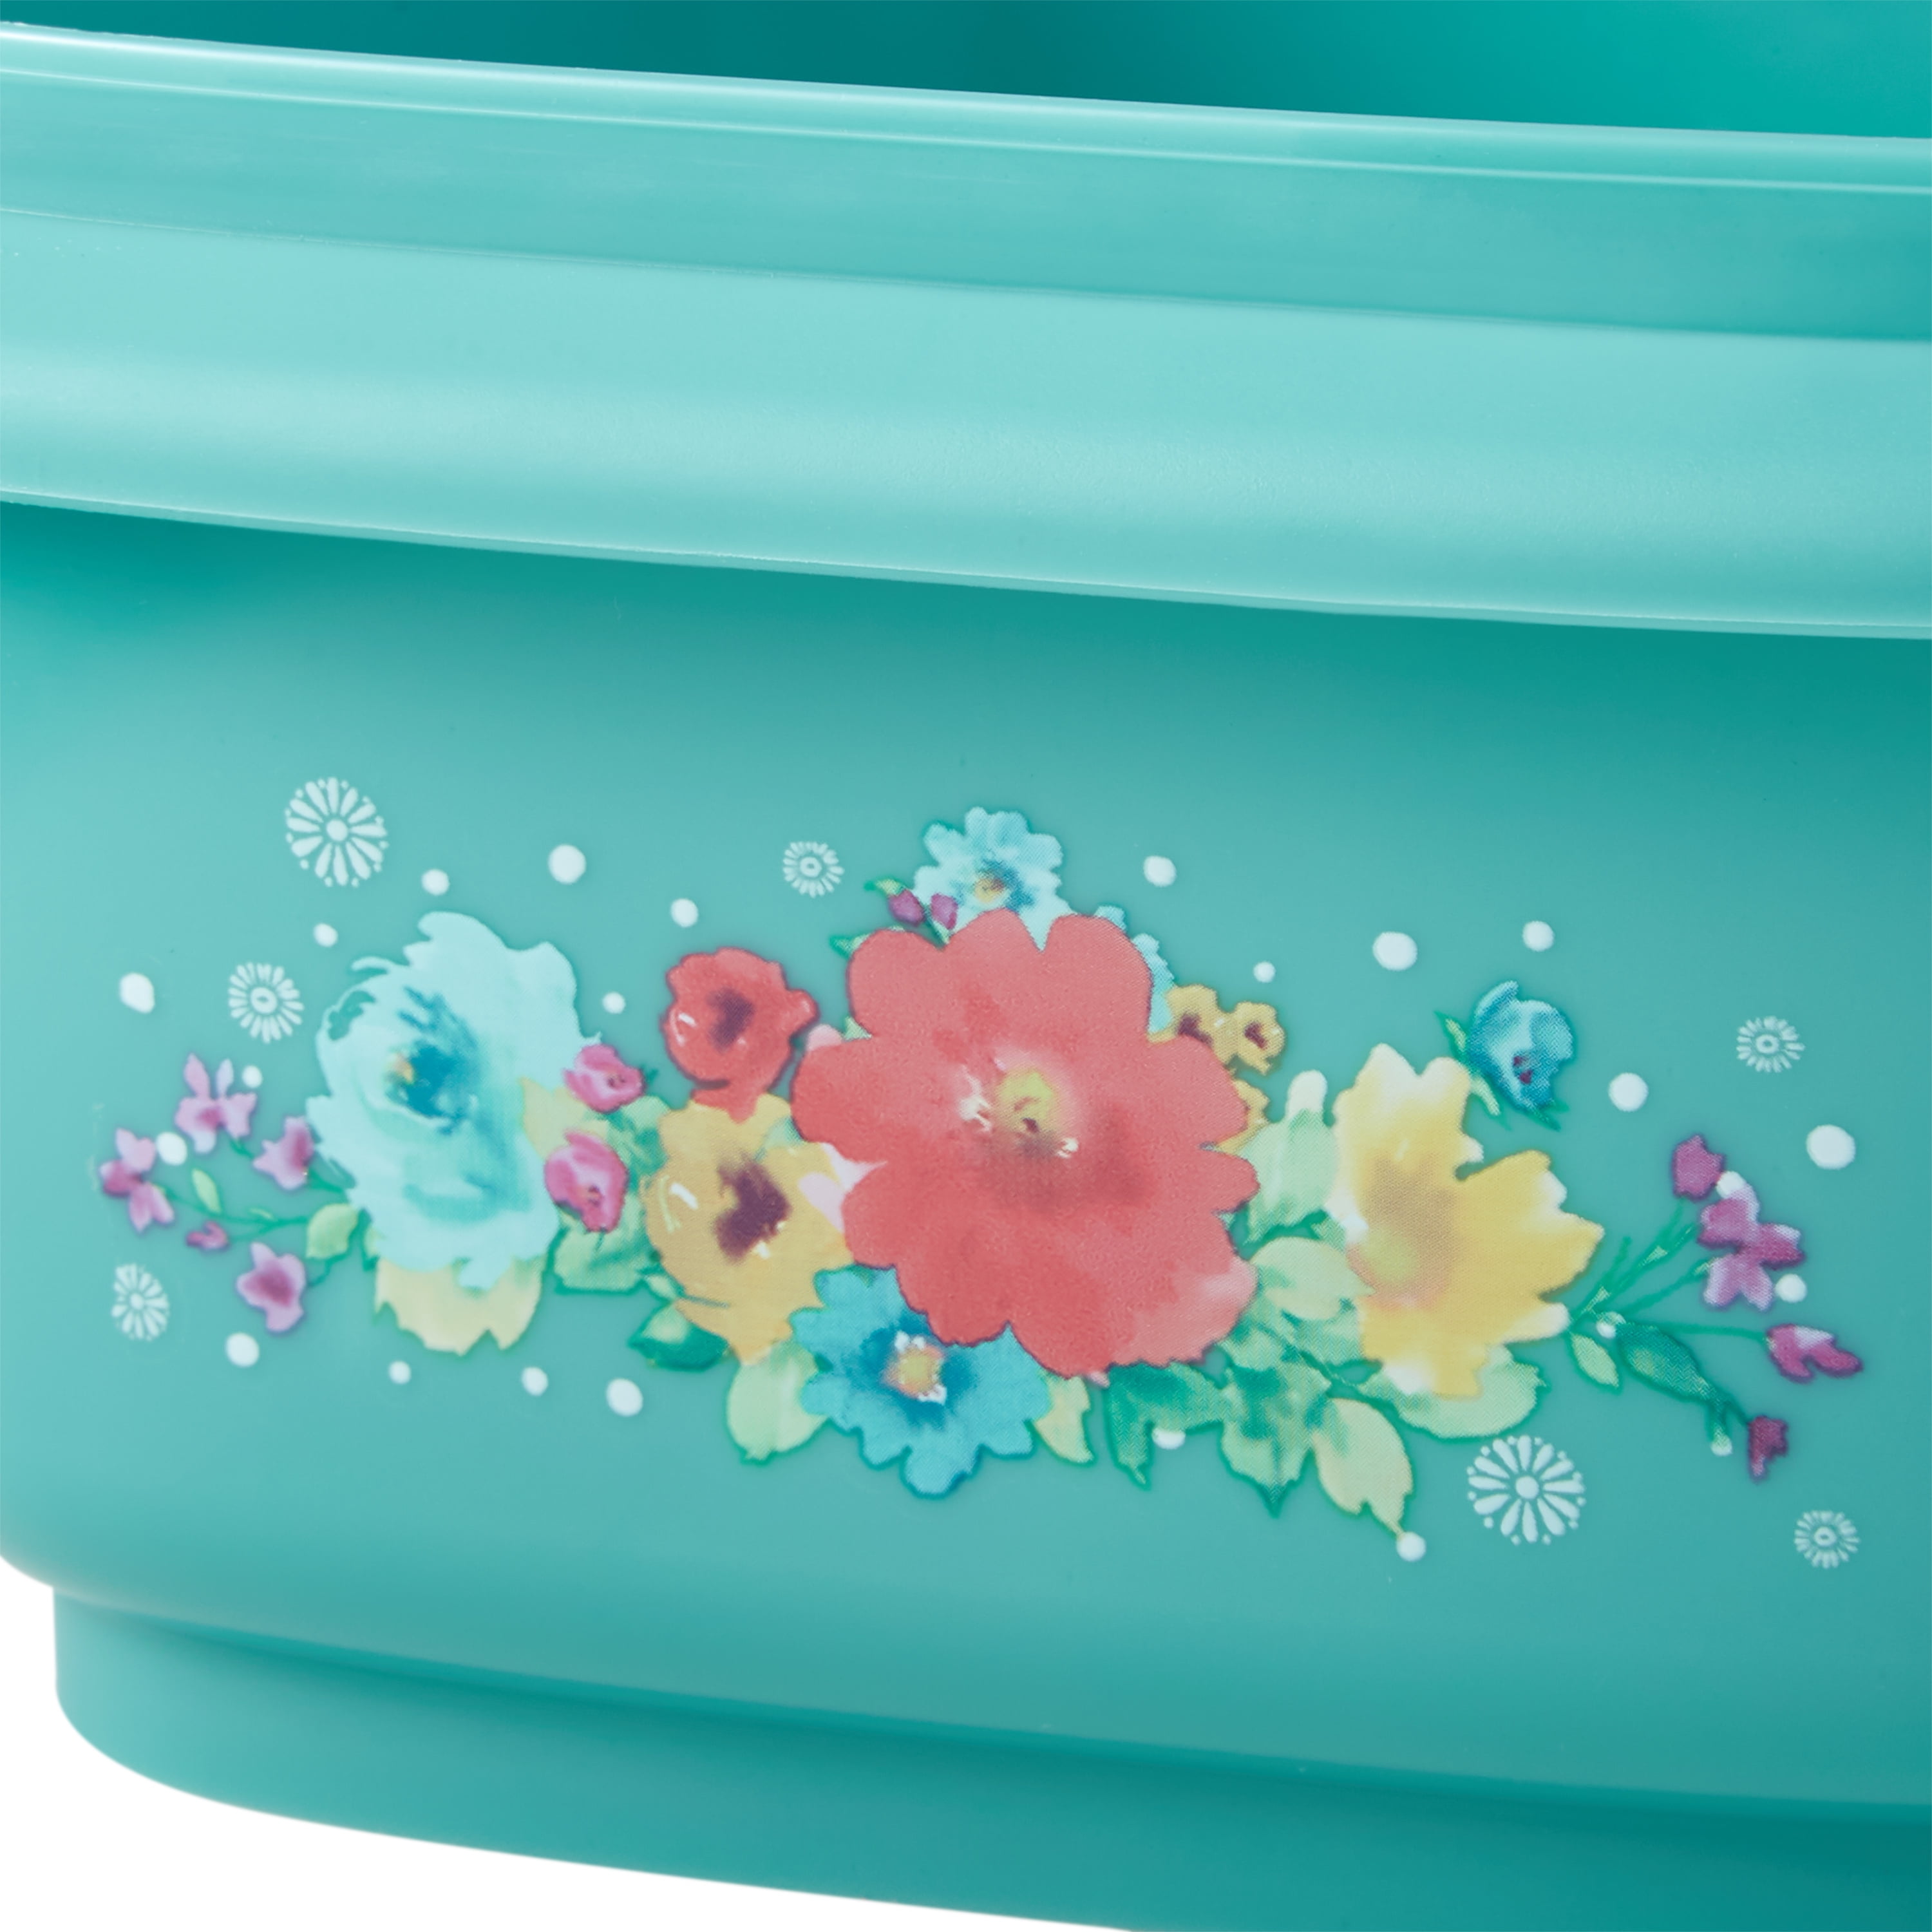 The Pioneer Woman Storage Containers Floral Print - Set of 3 - New